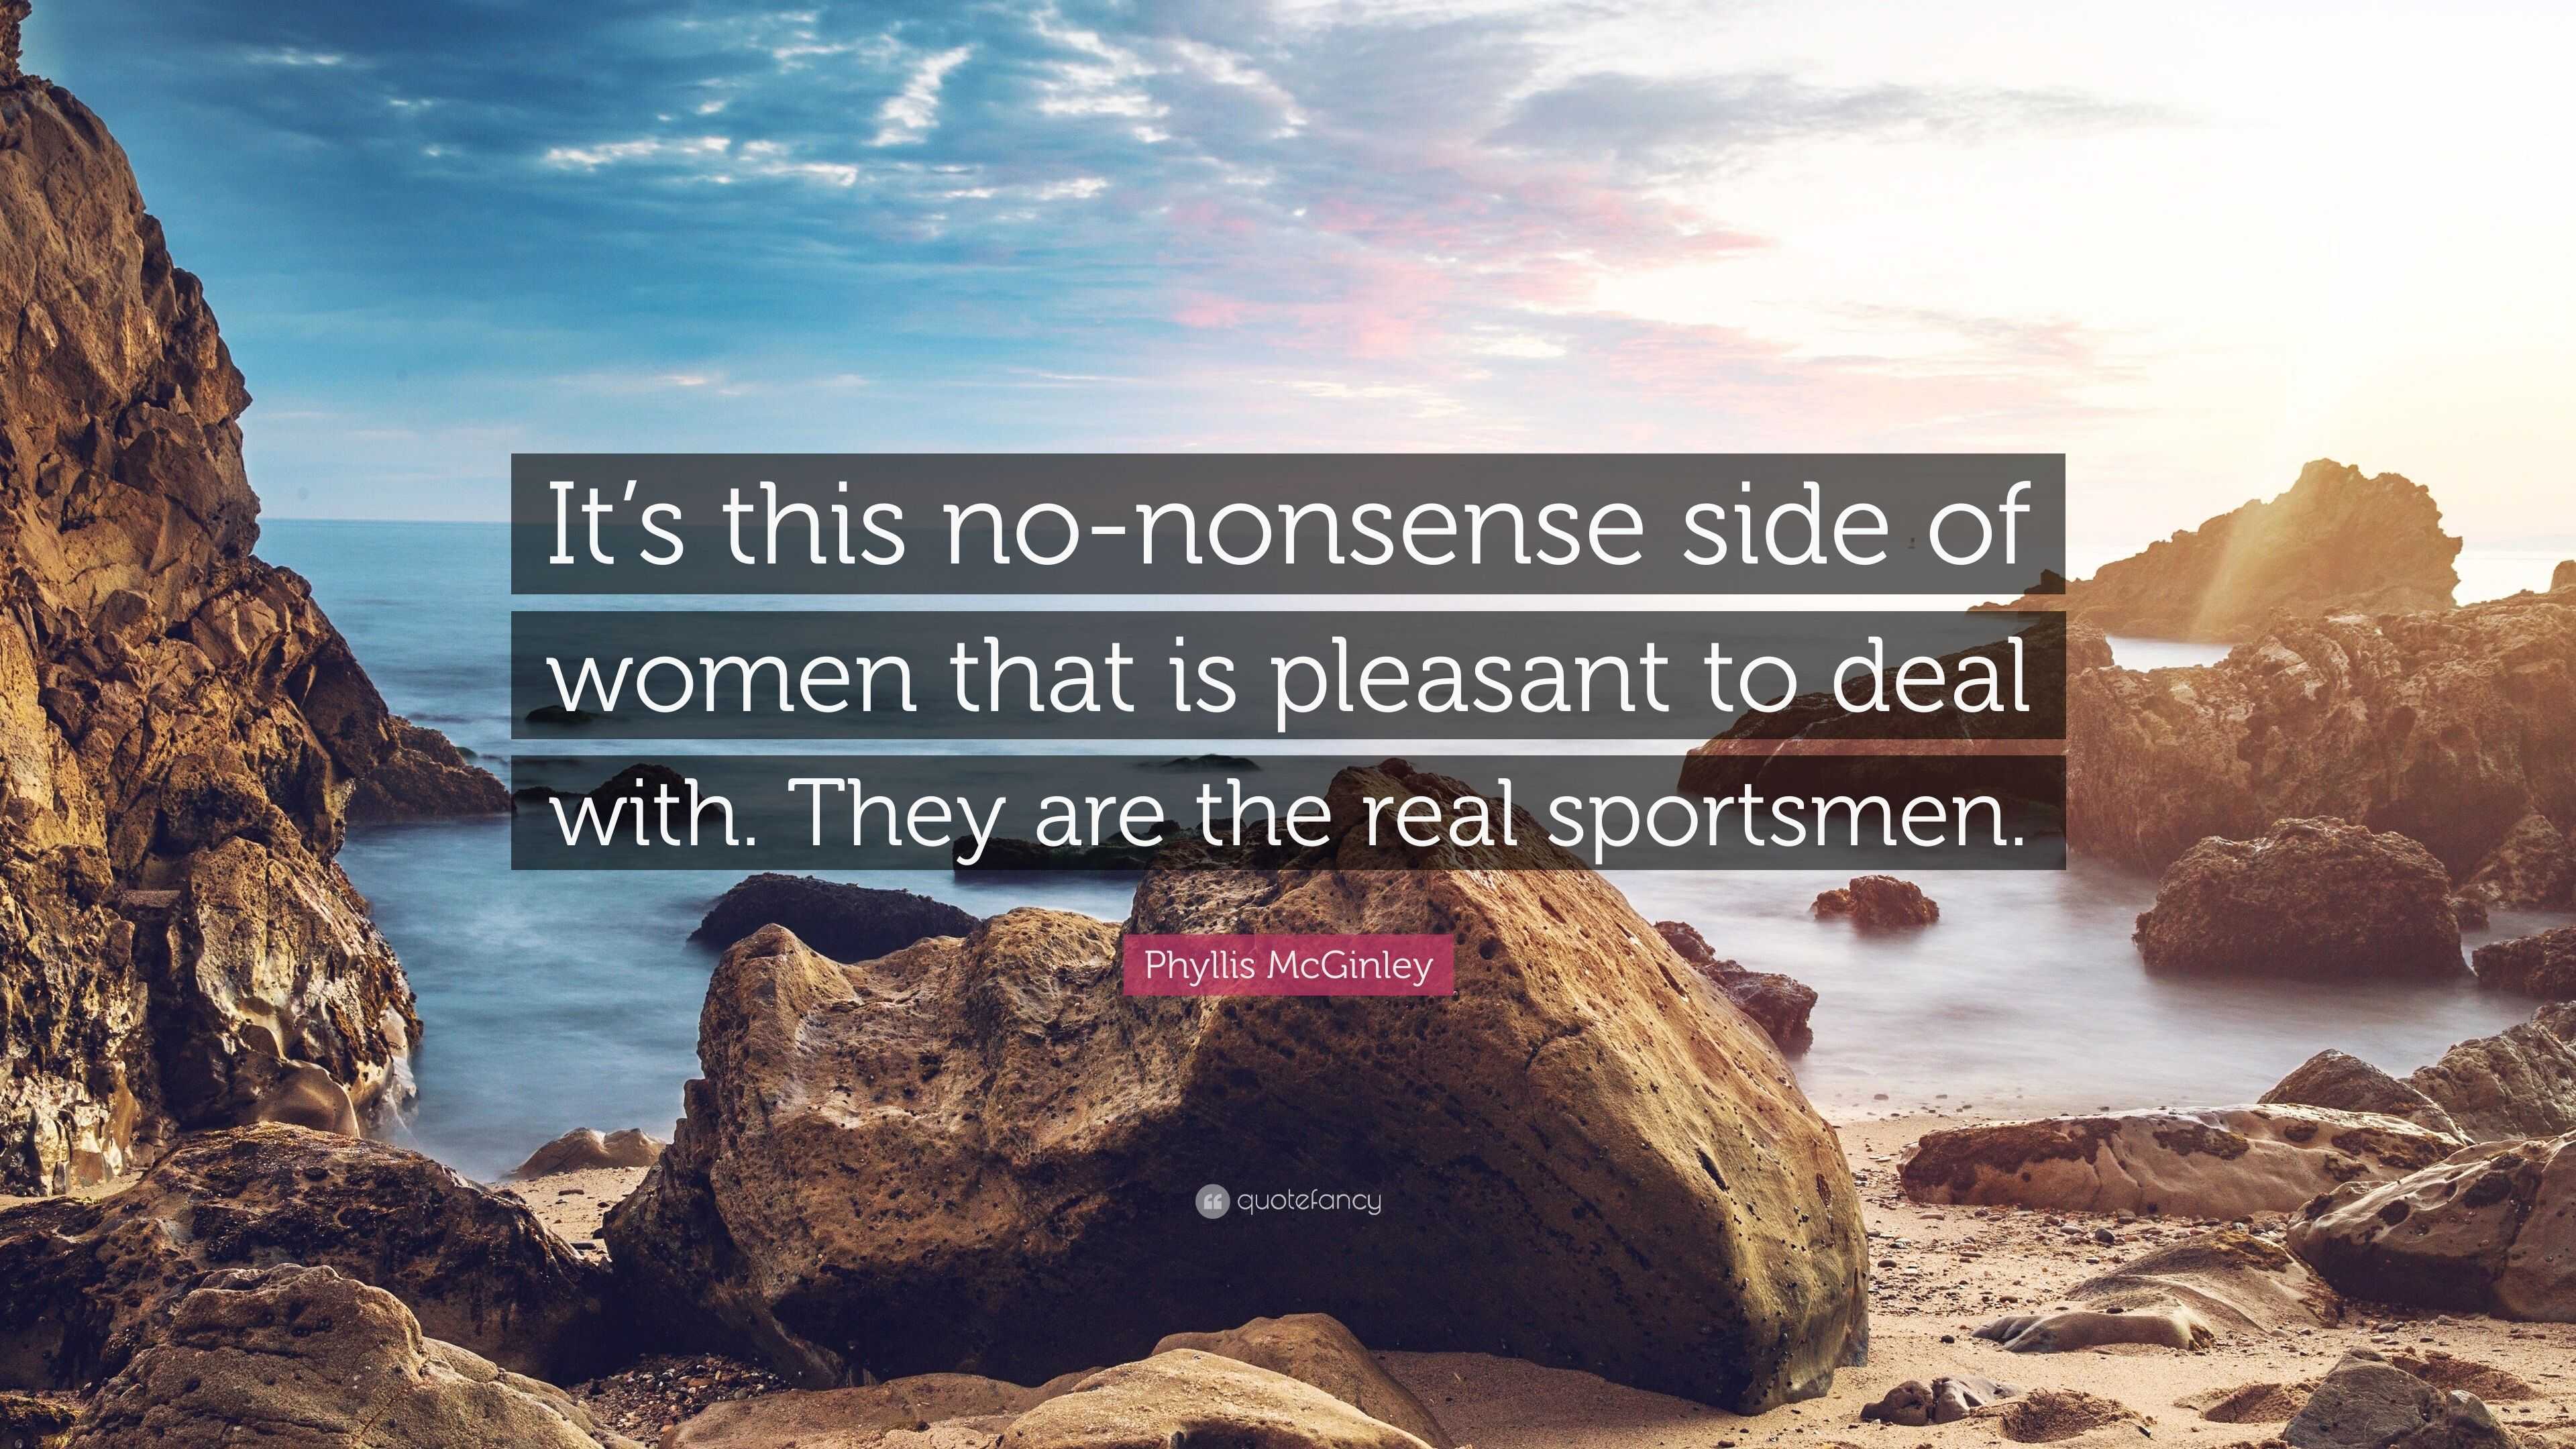 https://quotefancy.com/media/wallpaper/3840x2160/5034140-Phyllis-McGinley-Quote-It-s-this-no-nonsense-side-of-women-that-is.jpg